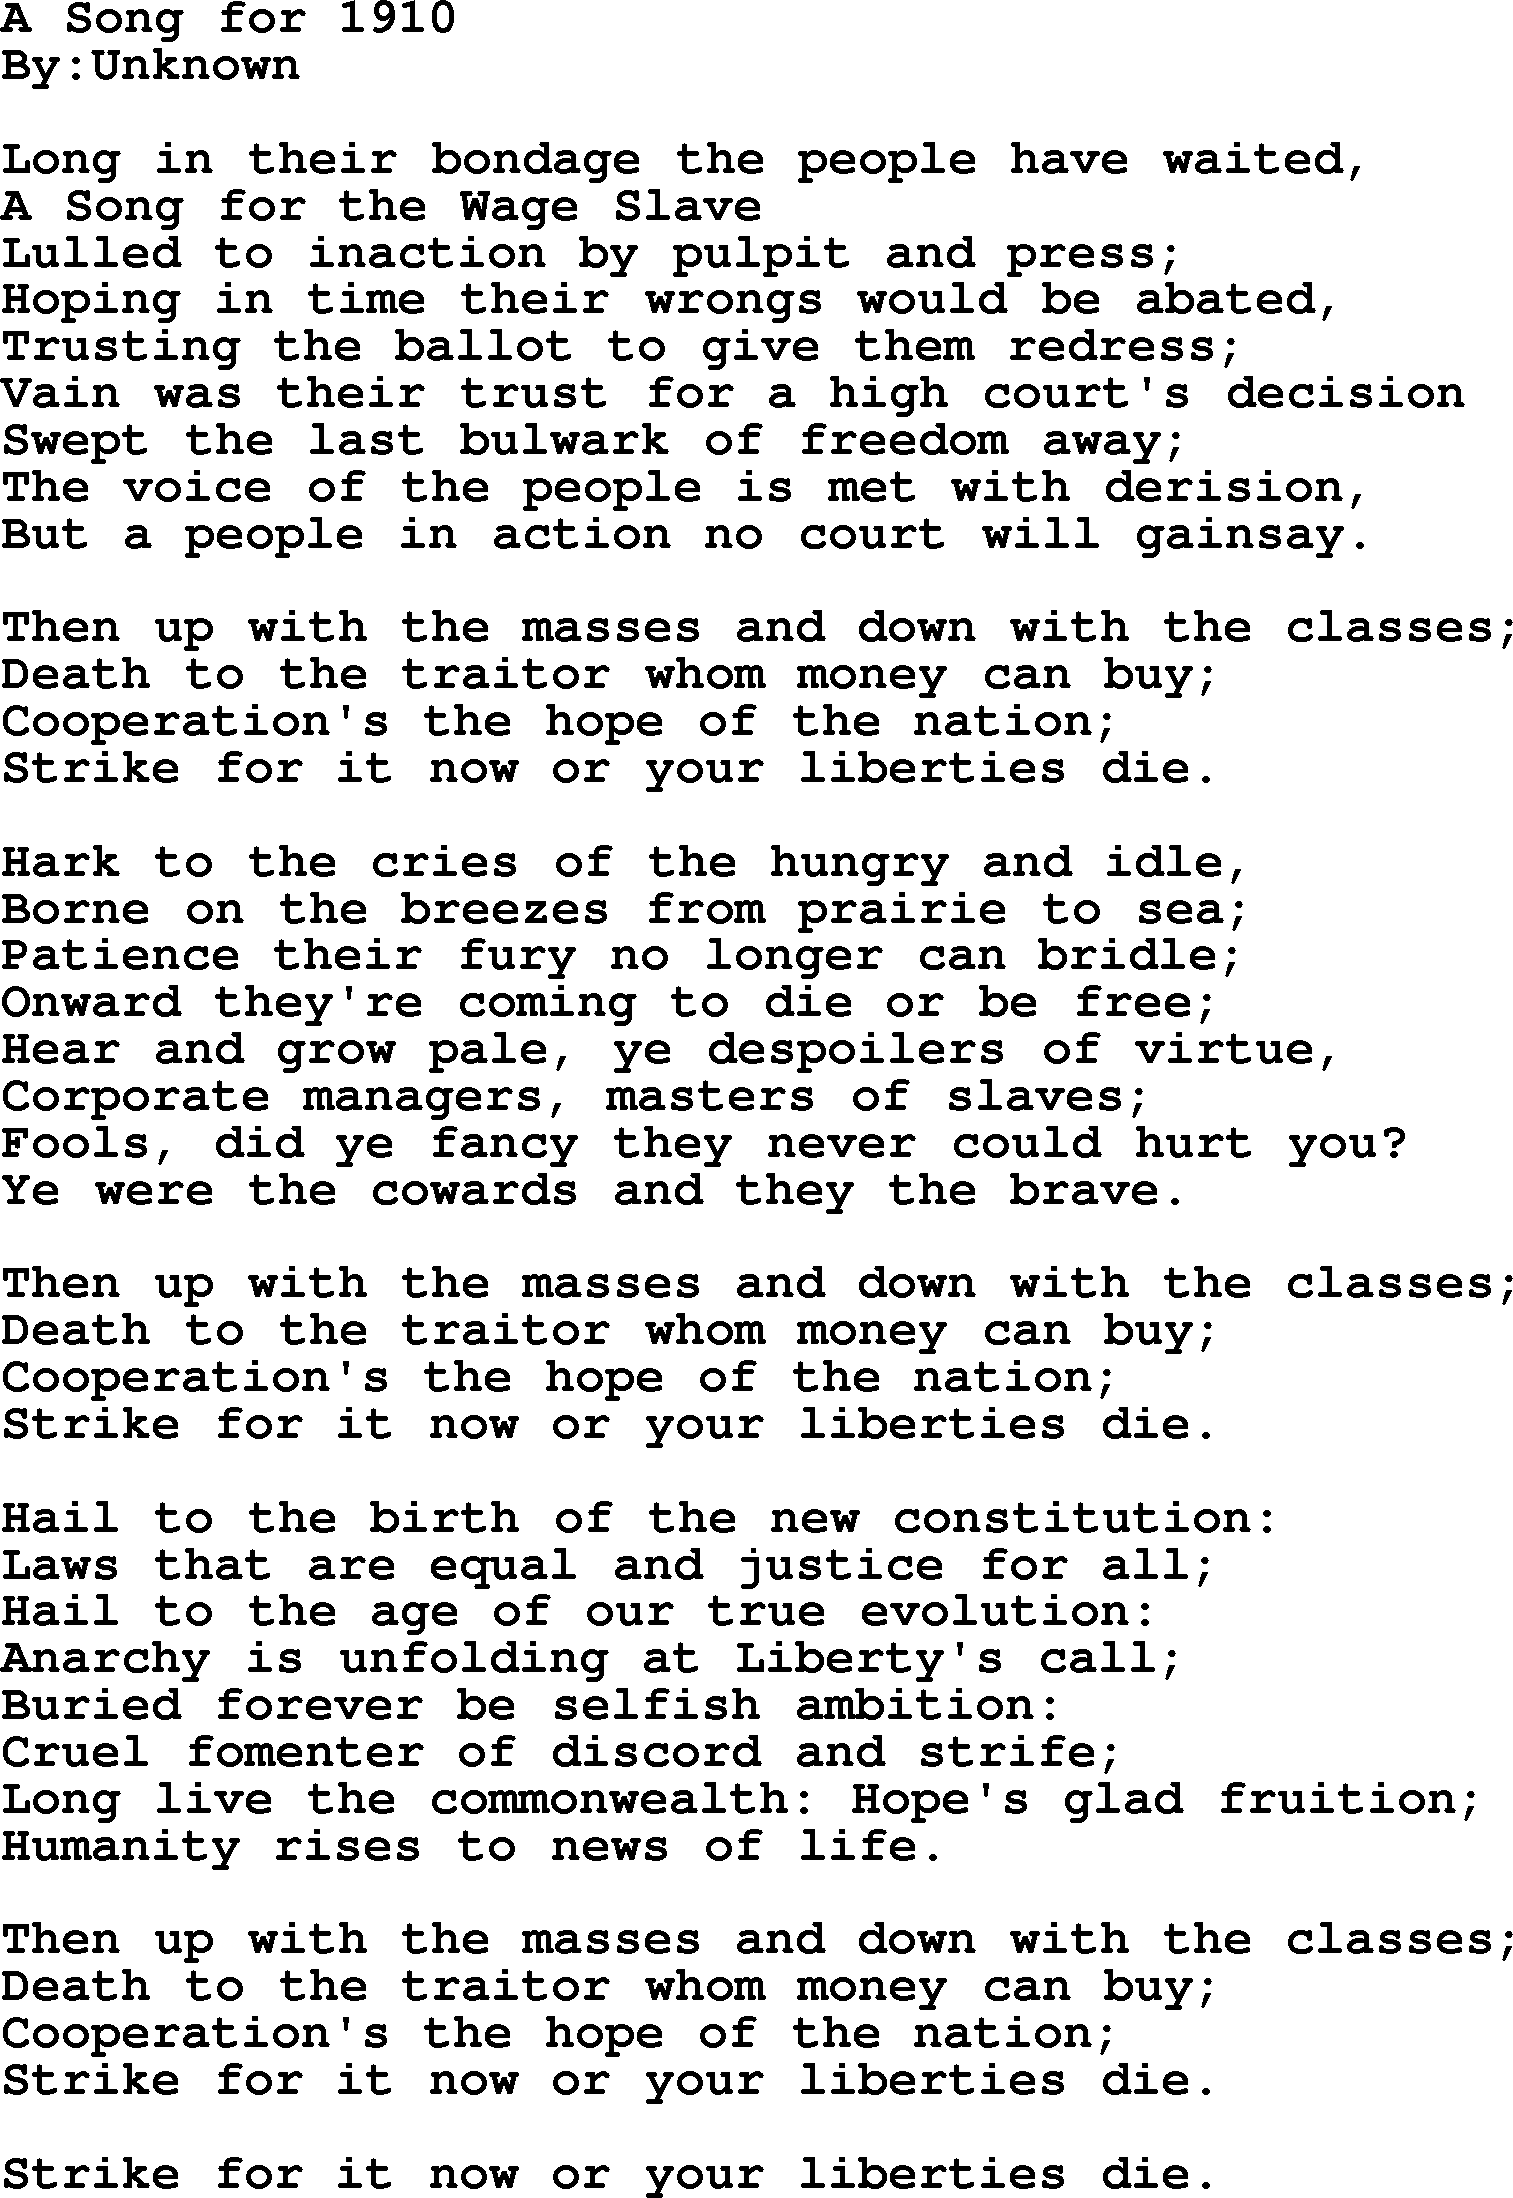 Political, Solidarity, Workers or Union song: A Song For 1910, lyrics